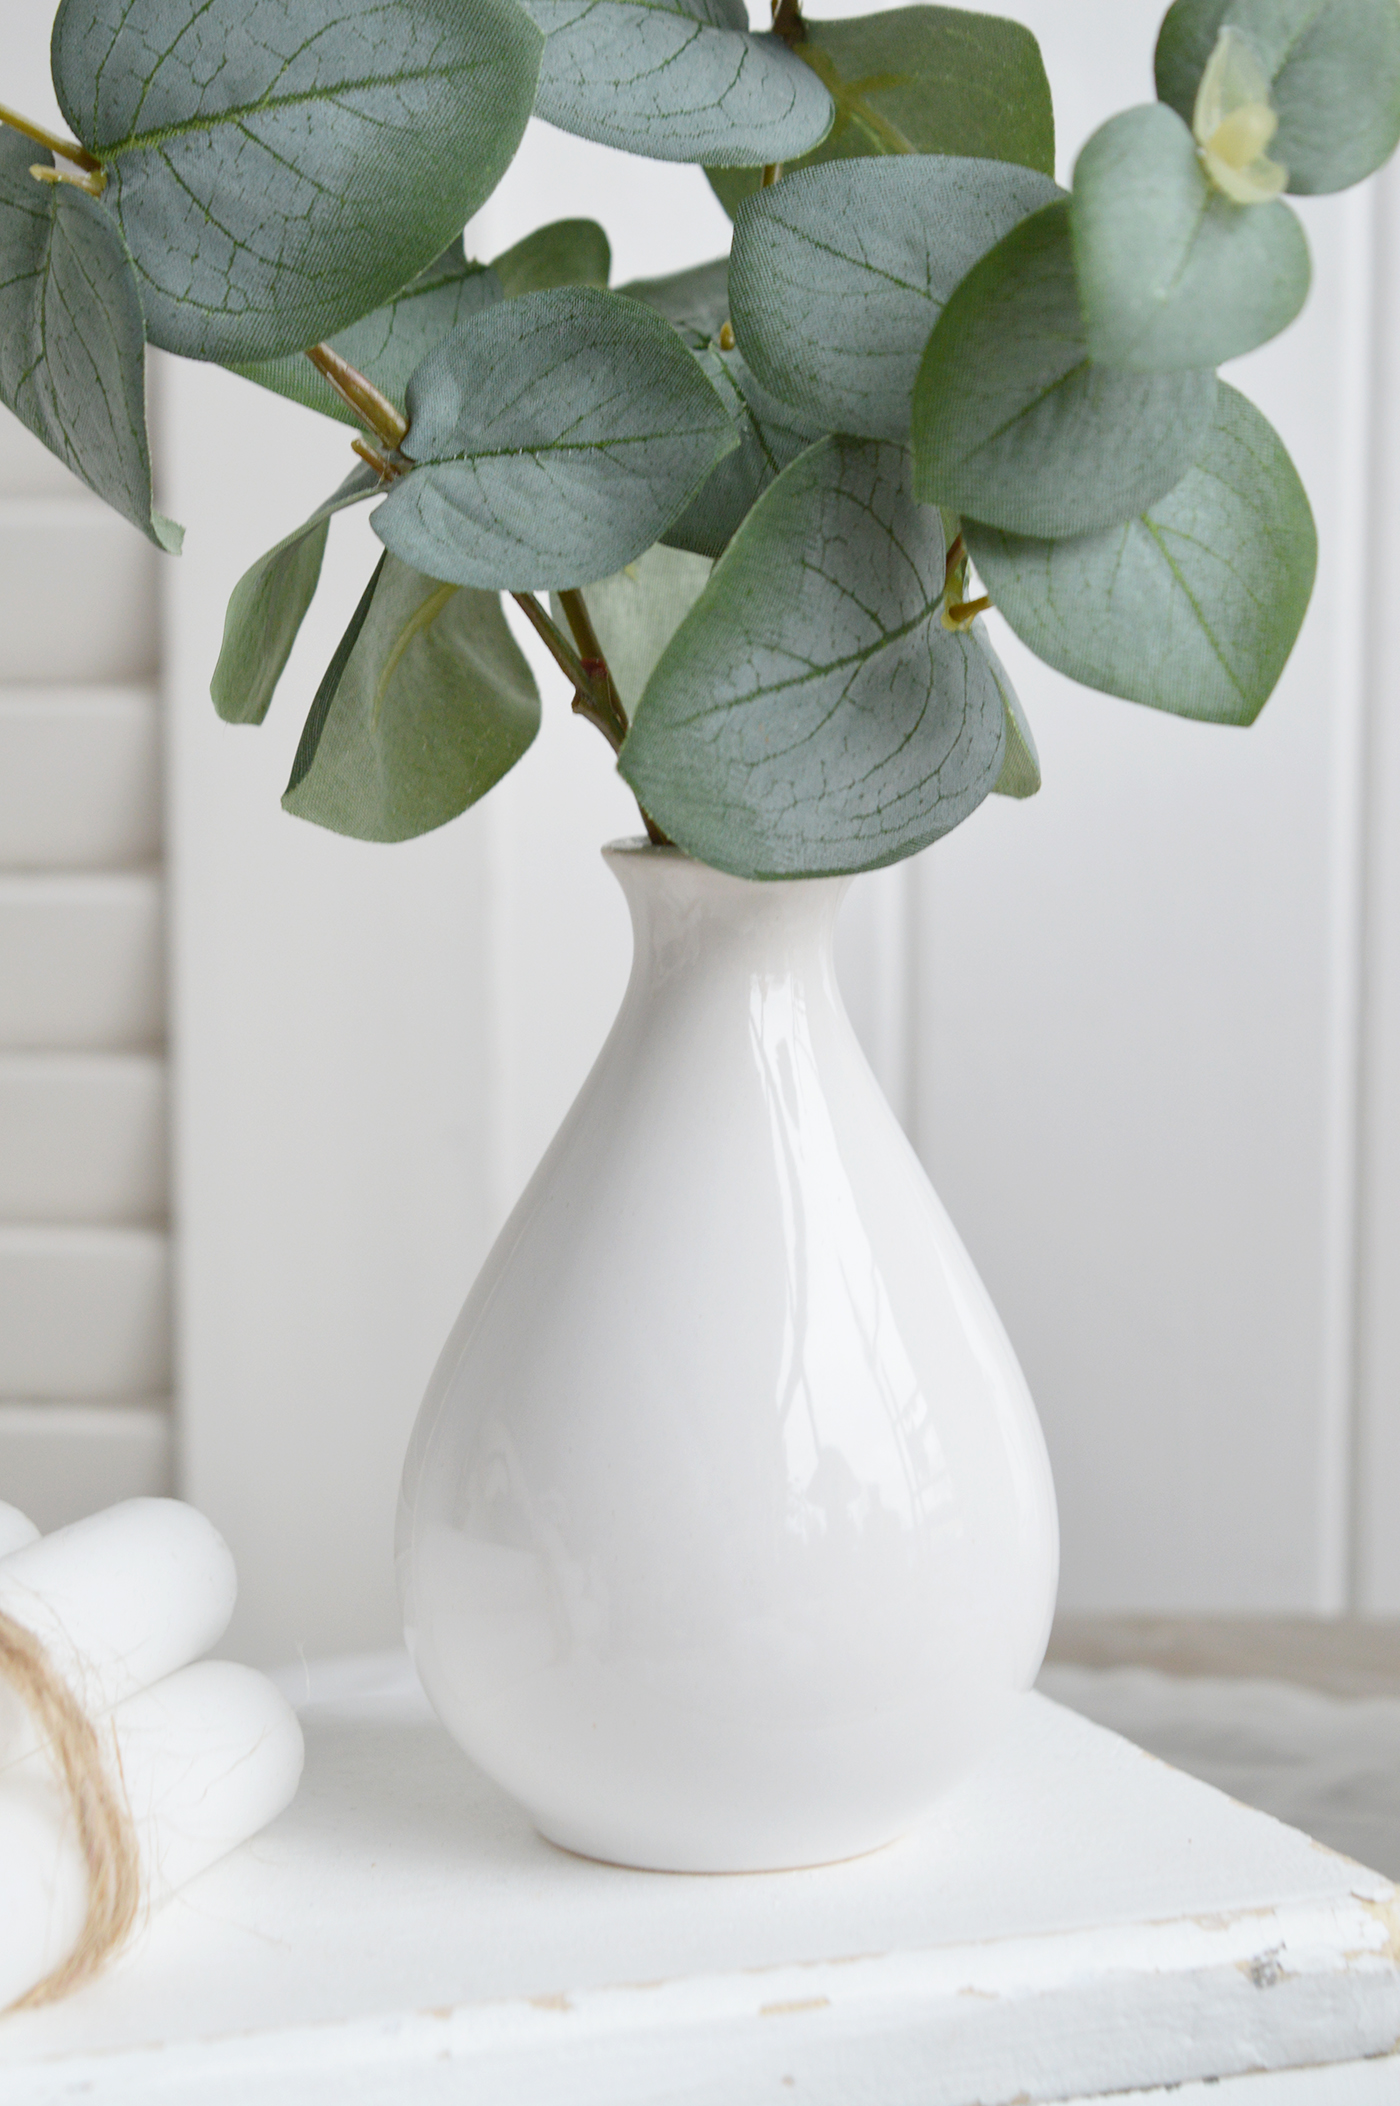 Faux Eucalyptus stems in a White Ceramic Vase - Hamptons and New England Coastal Homes and Interiors